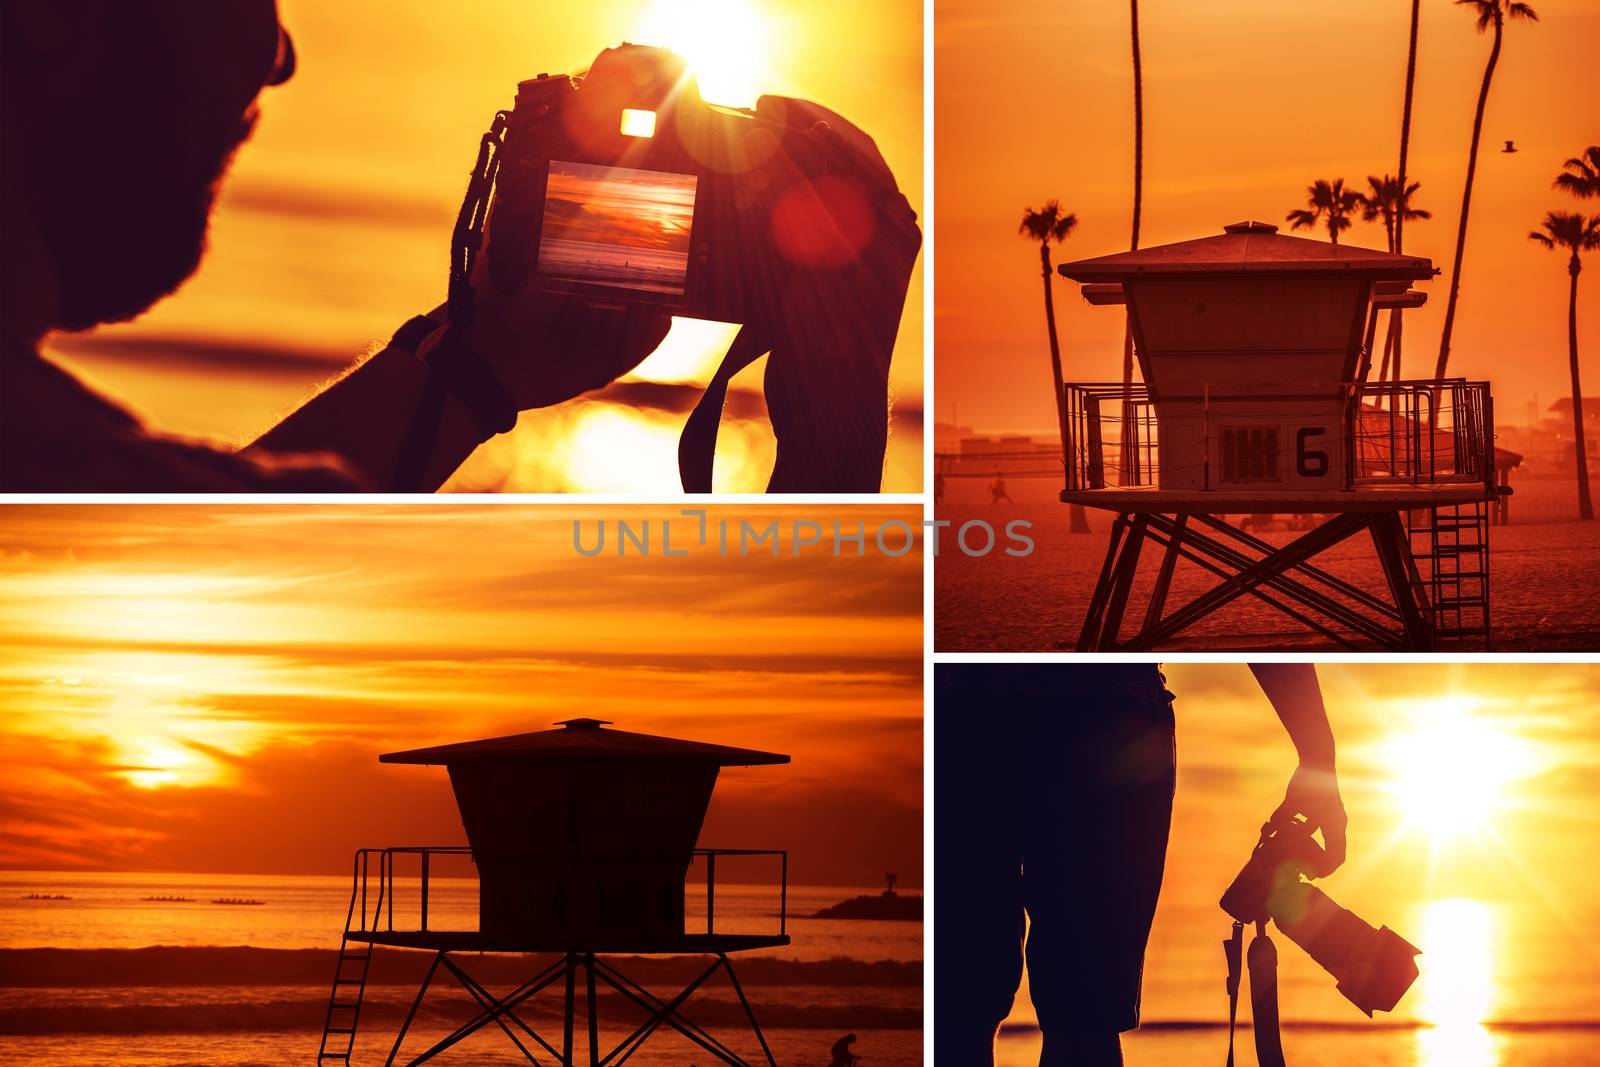 Beach Sunset Photography Collage. Young Photographer with Camera Taking Pictures at Sunset. California Oceanside Beach. Nature and Travel Photography Theme.